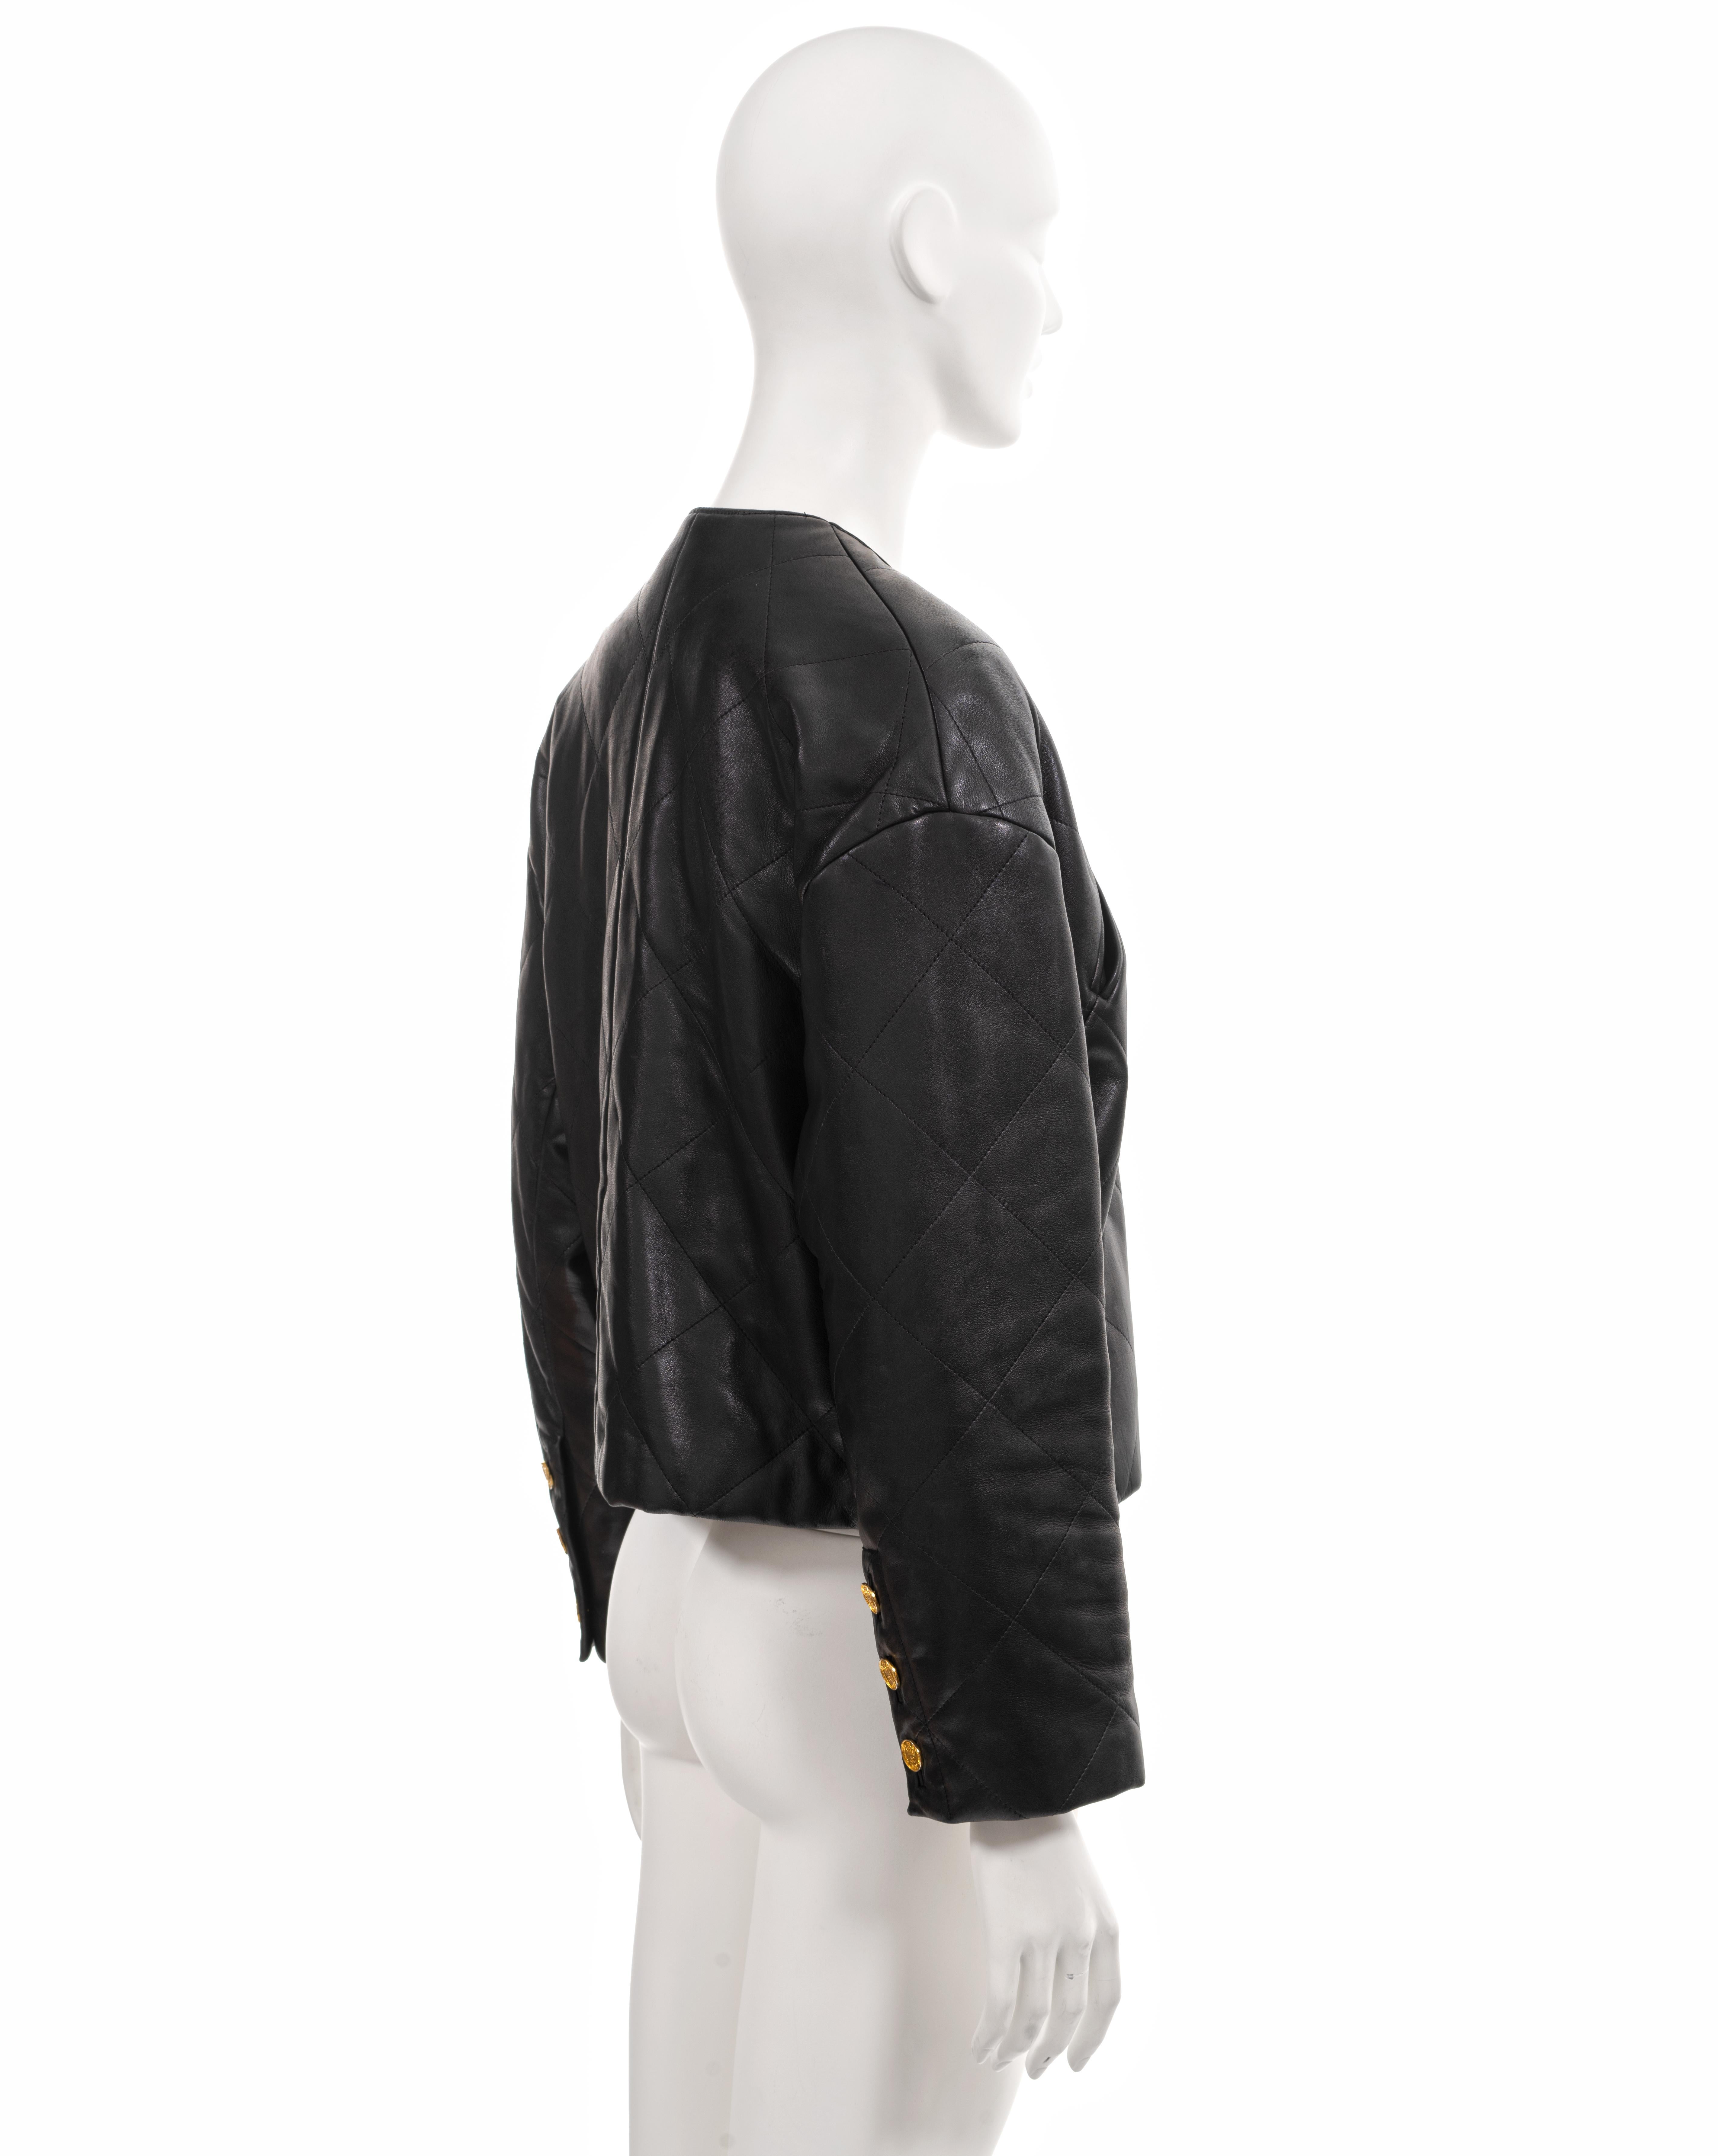 Chanel by Karl Lagerfeld black quilted lambskin leather jacket, fw 1987 3